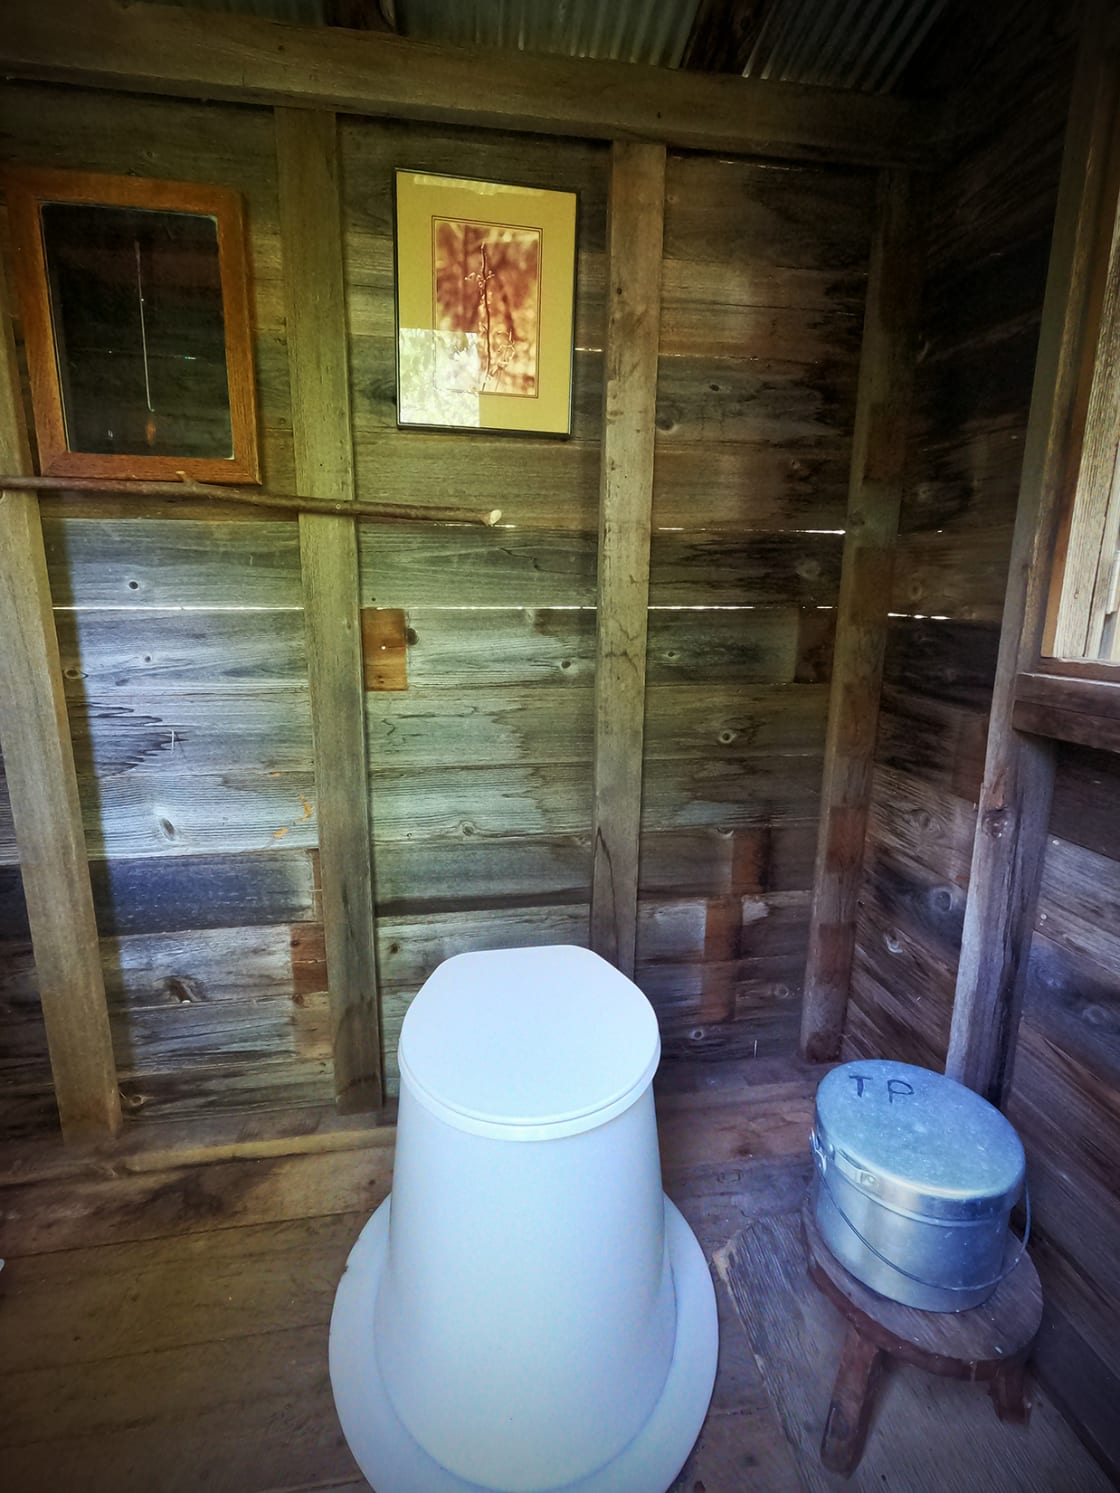 It's an outhouse but it's got its charm.